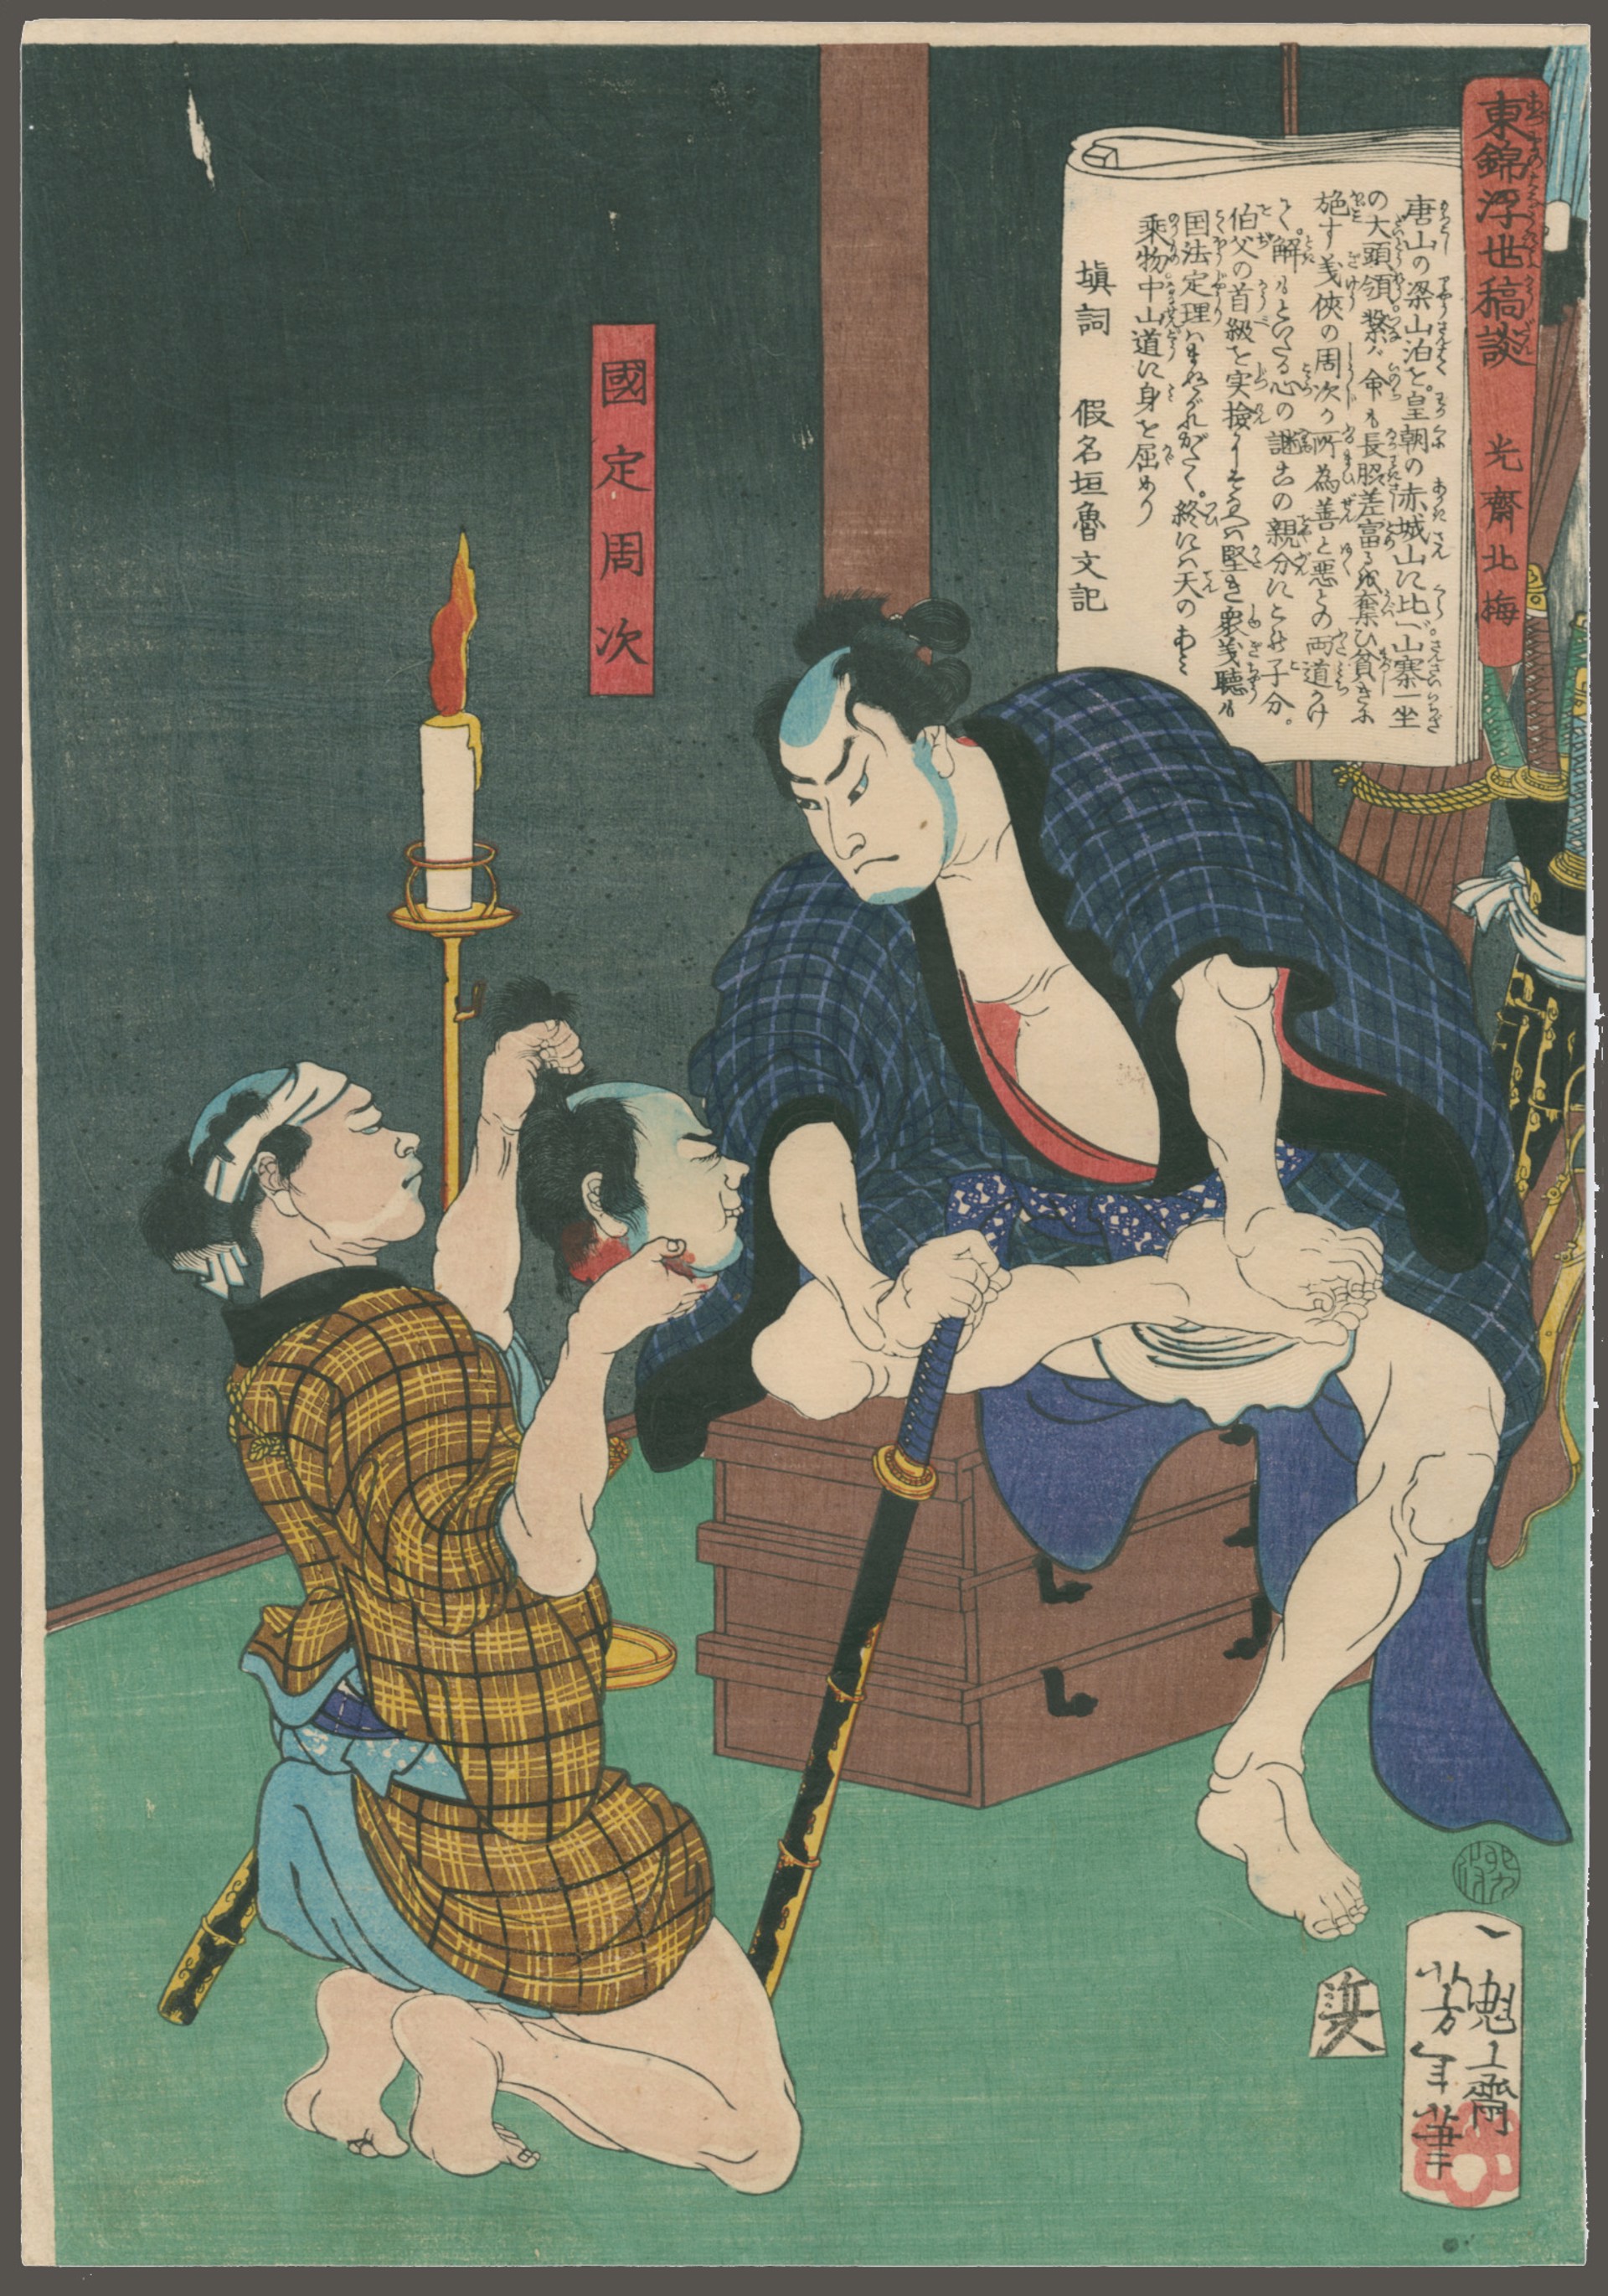 Kunisada Chuji, A Famous Knight of te Town, Presented a Severed Head Tales of the Floating World on Eastern Brocade by Yoshitoshi